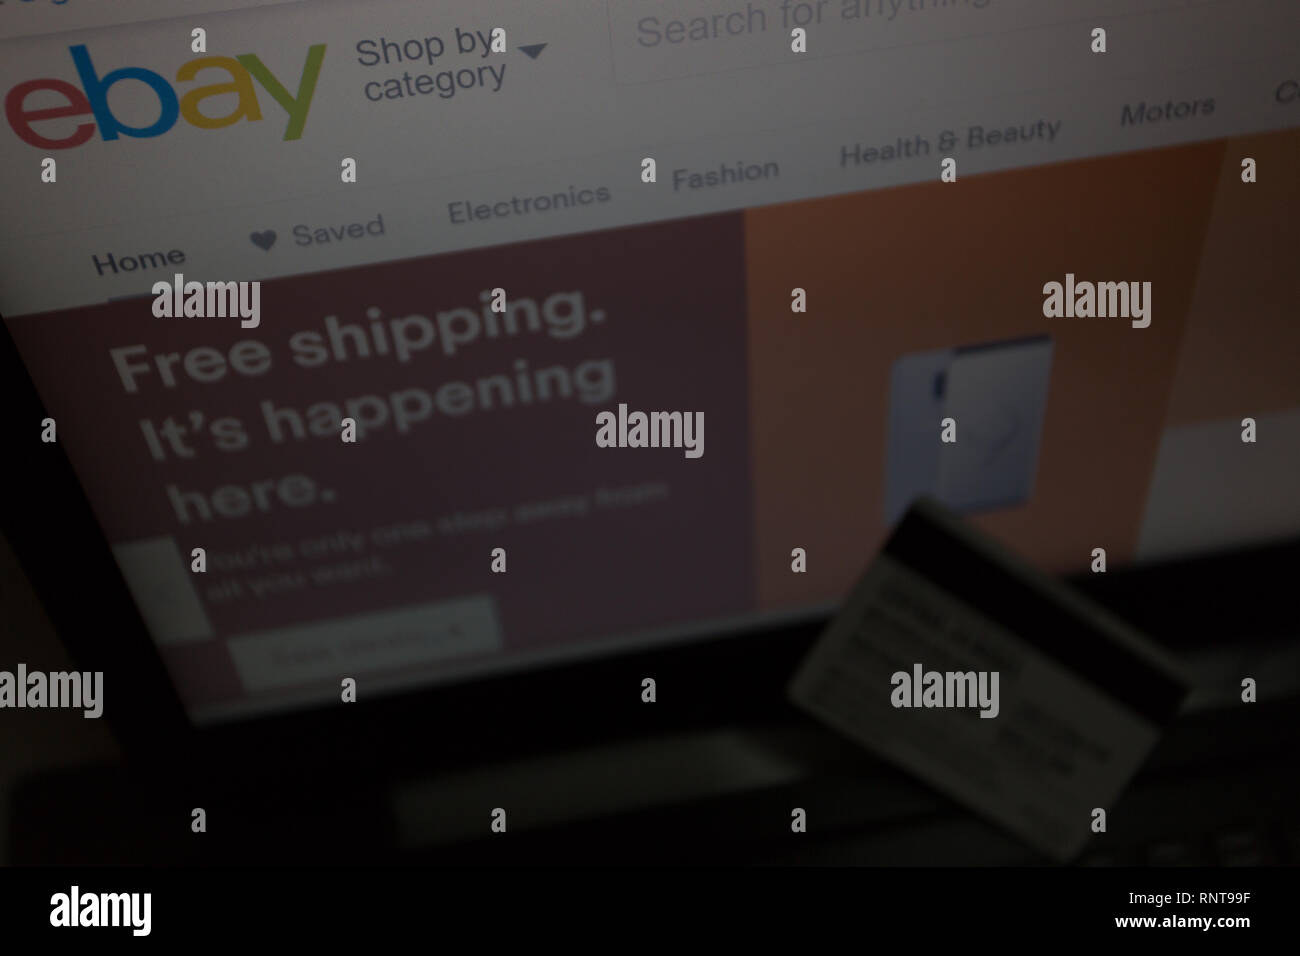 eBay logo on its website is shown on laptop computer screen, credit debit card unfocused, online shoppers, purchases, payments, transactions concept Stock Photo